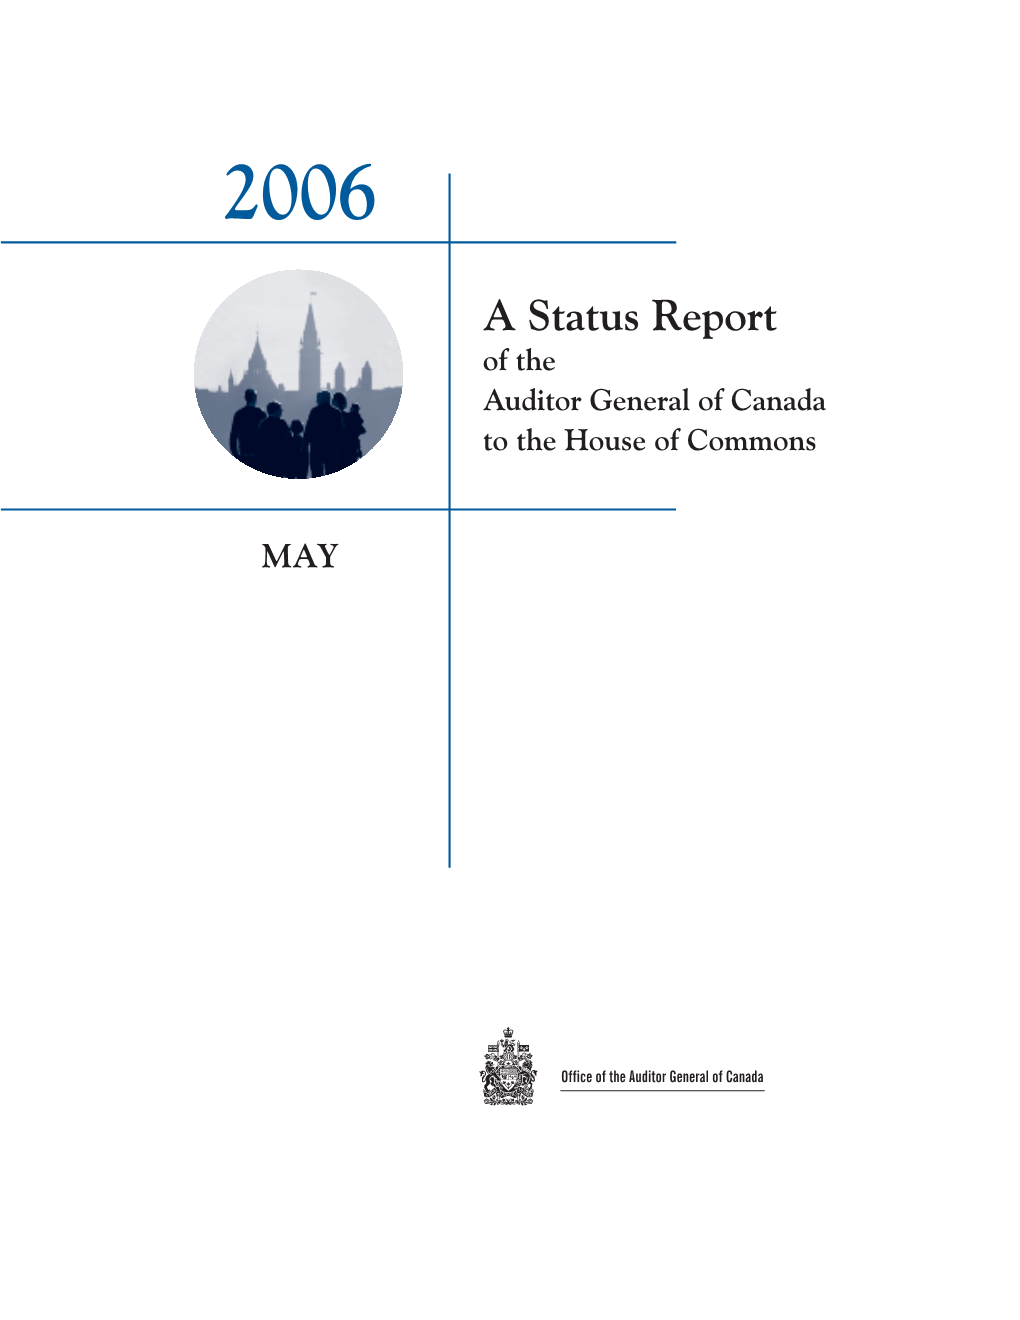 Report of the Auditor General of Canada to the House of Commons